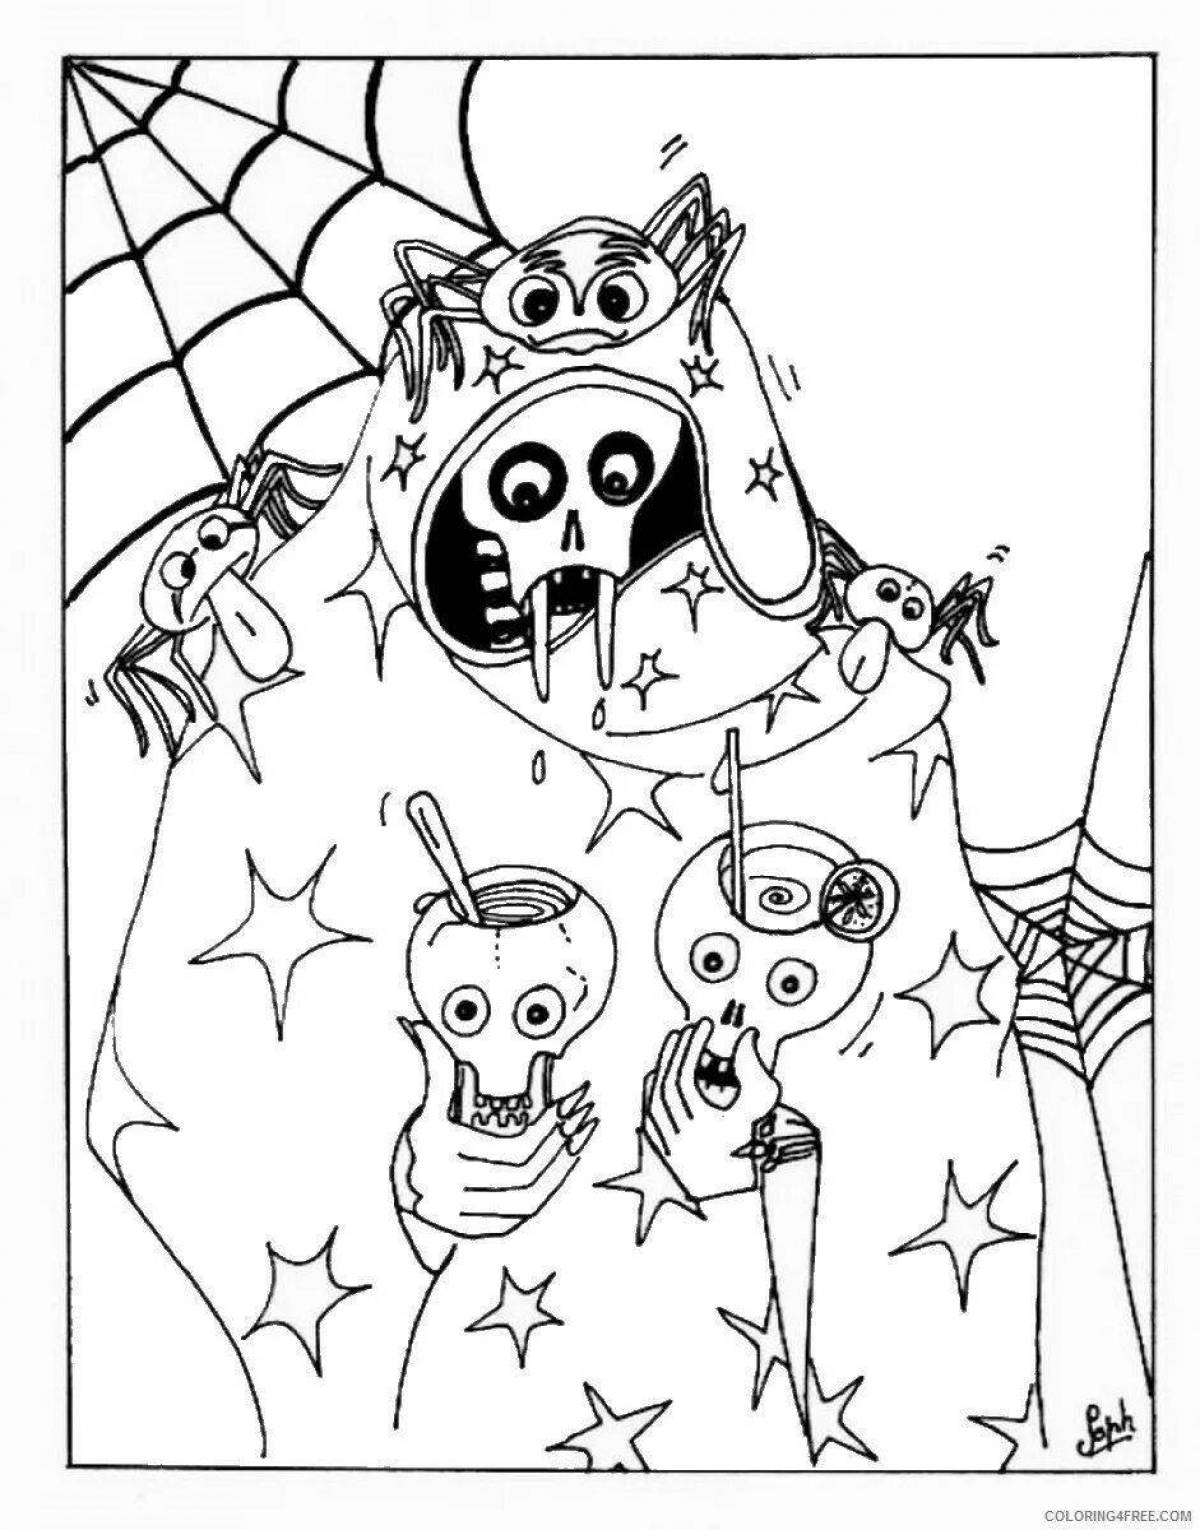 Horrifying scary children's coloring book